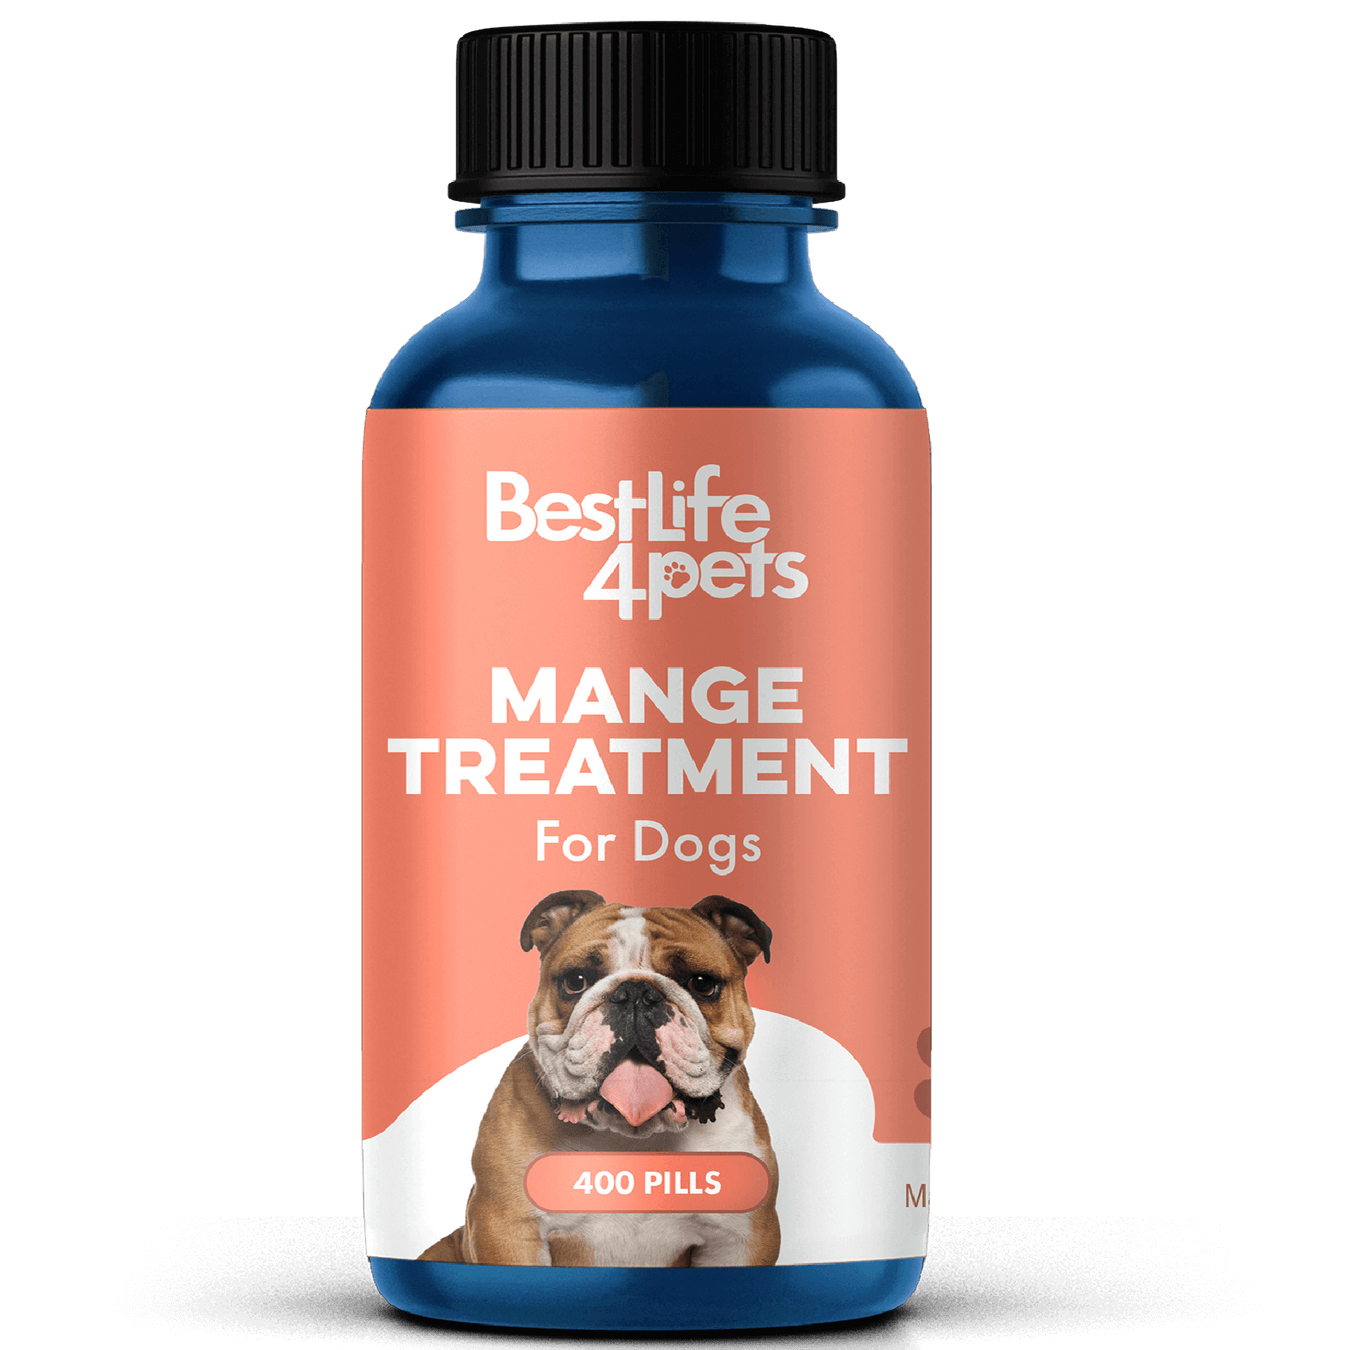 Mite Treatment For Dogs